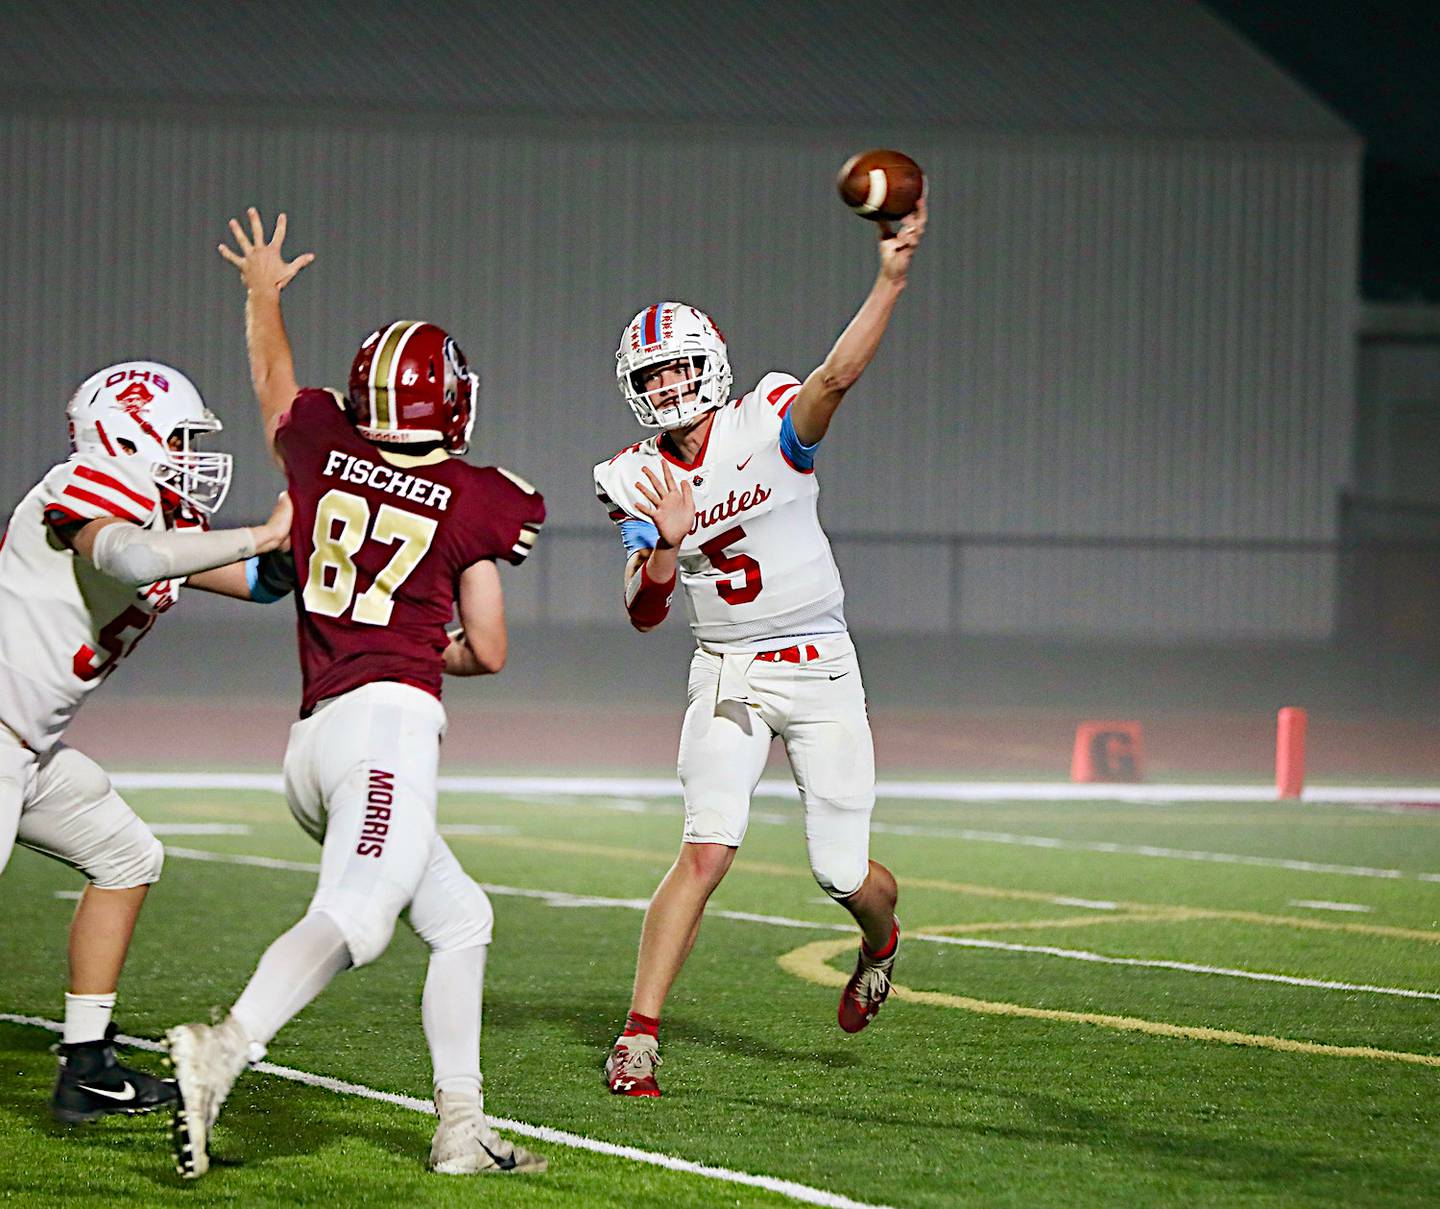 Ottawa's Braiden Miller throws a pass Friday night in a 49-0 loss to Morris as Morris' Ryan Fischer applies pressure. Miller was 11 of 21 for 120 yards.